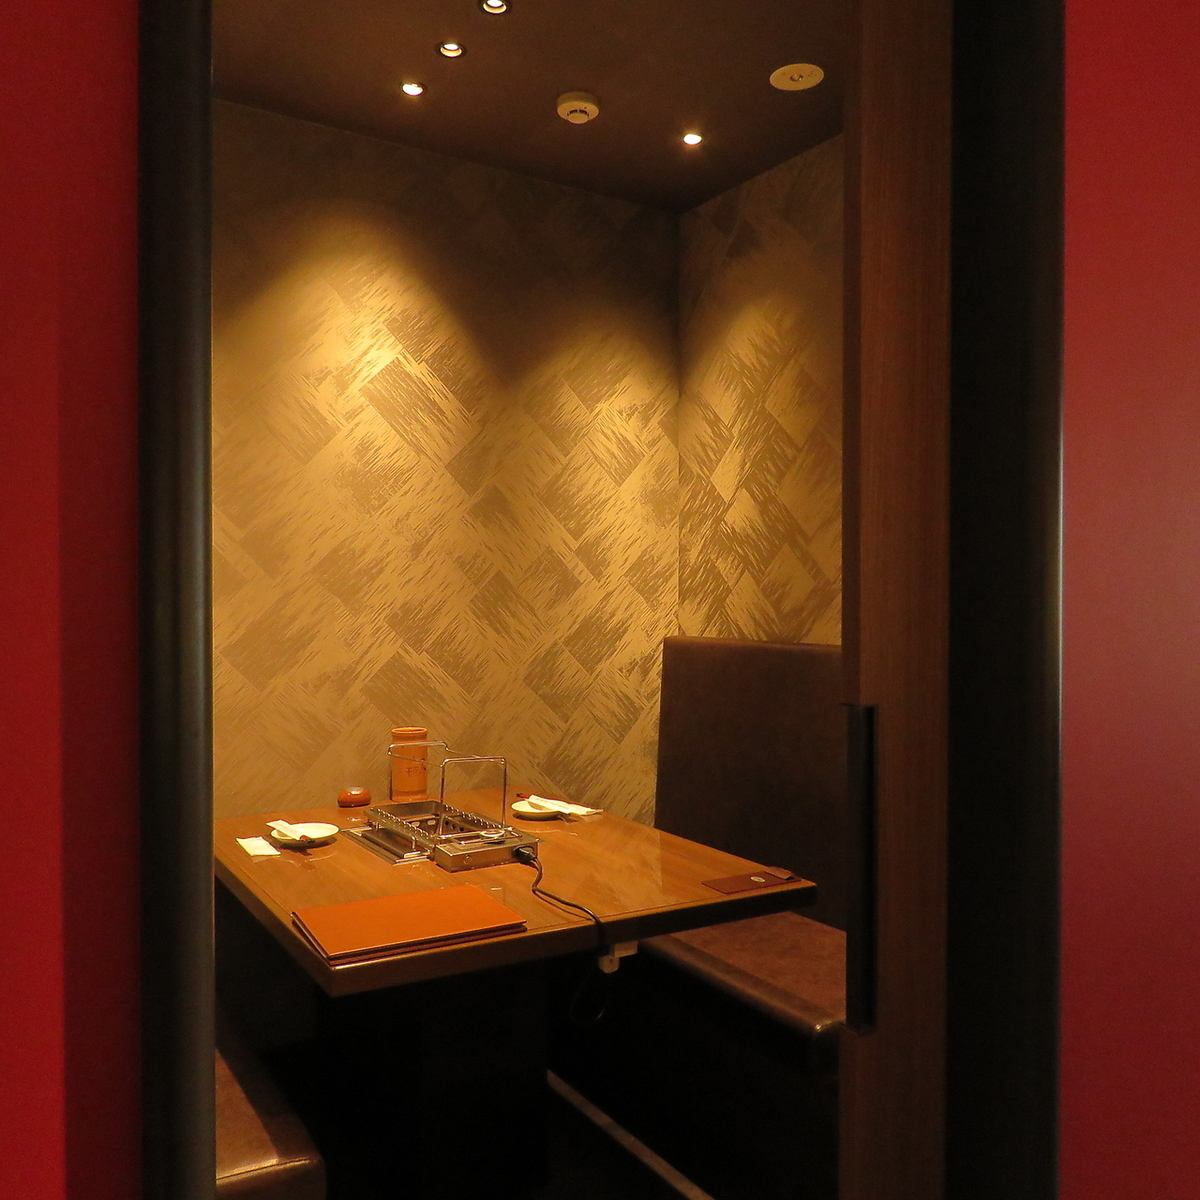 A very popular private room, perfect for dates, anniversaries, etc.